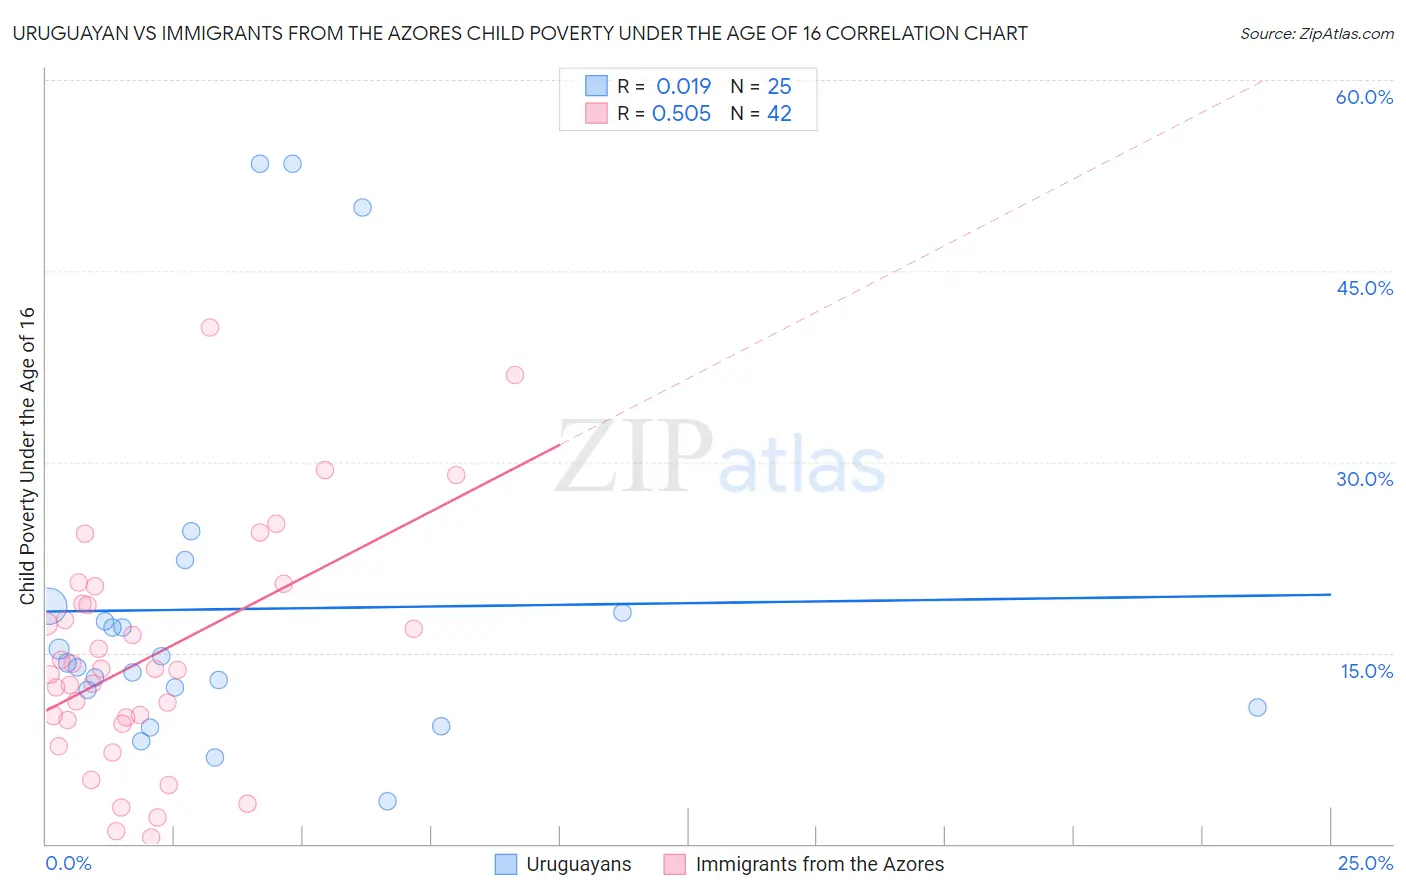 Uruguayan vs Immigrants from the Azores Child Poverty Under the Age of 16